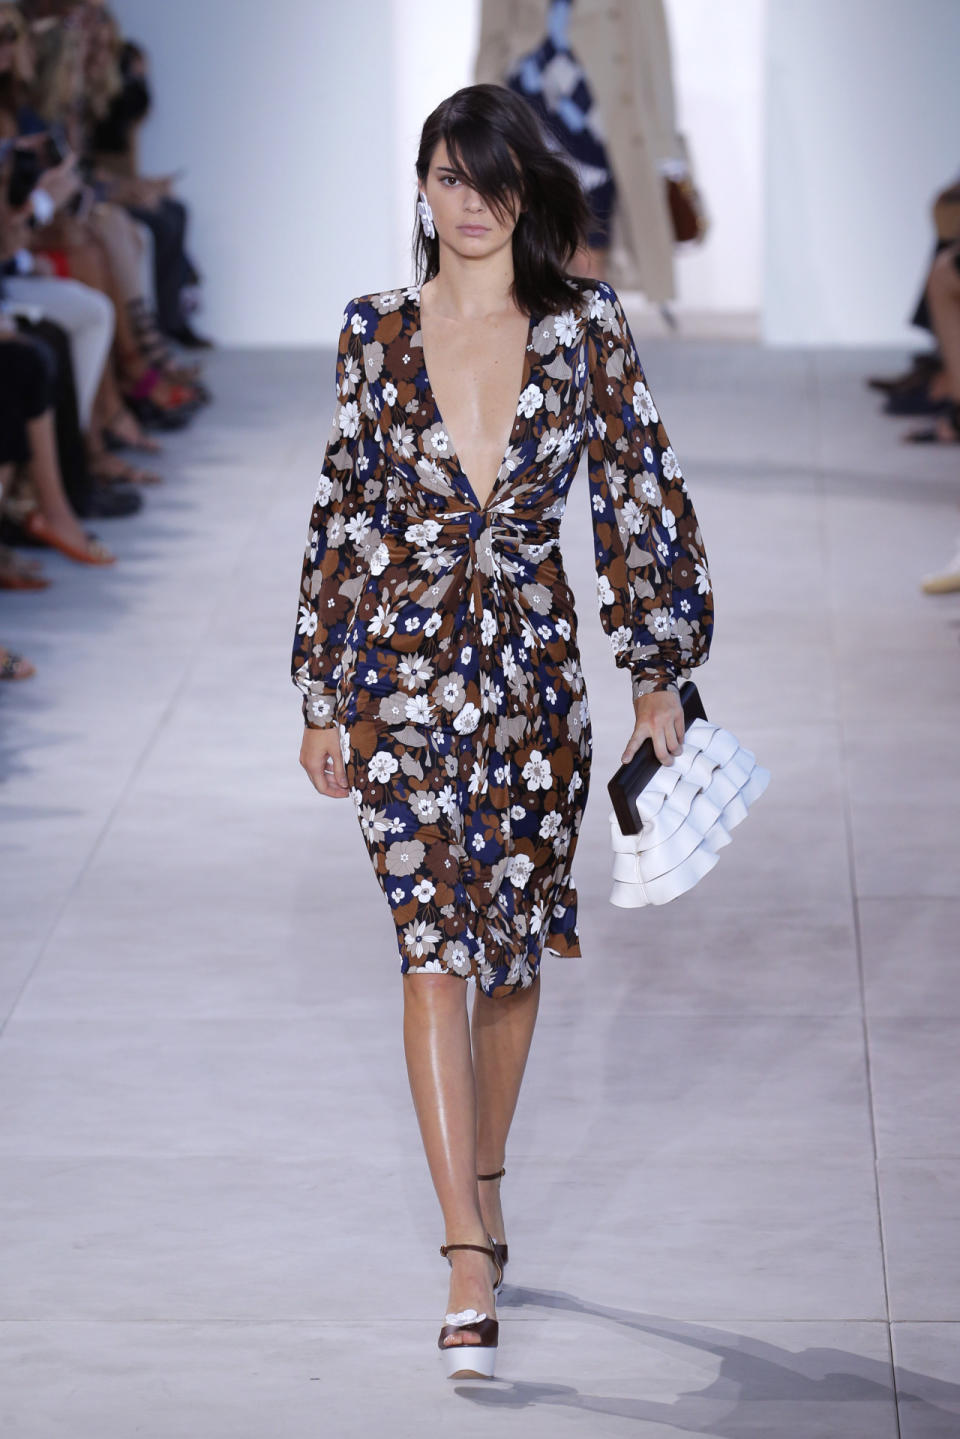 <p>Clad in a plunging floral dress, Kendall stormed the runway at the Michael Kors show.<i> [Photo: Getty]</i></p>